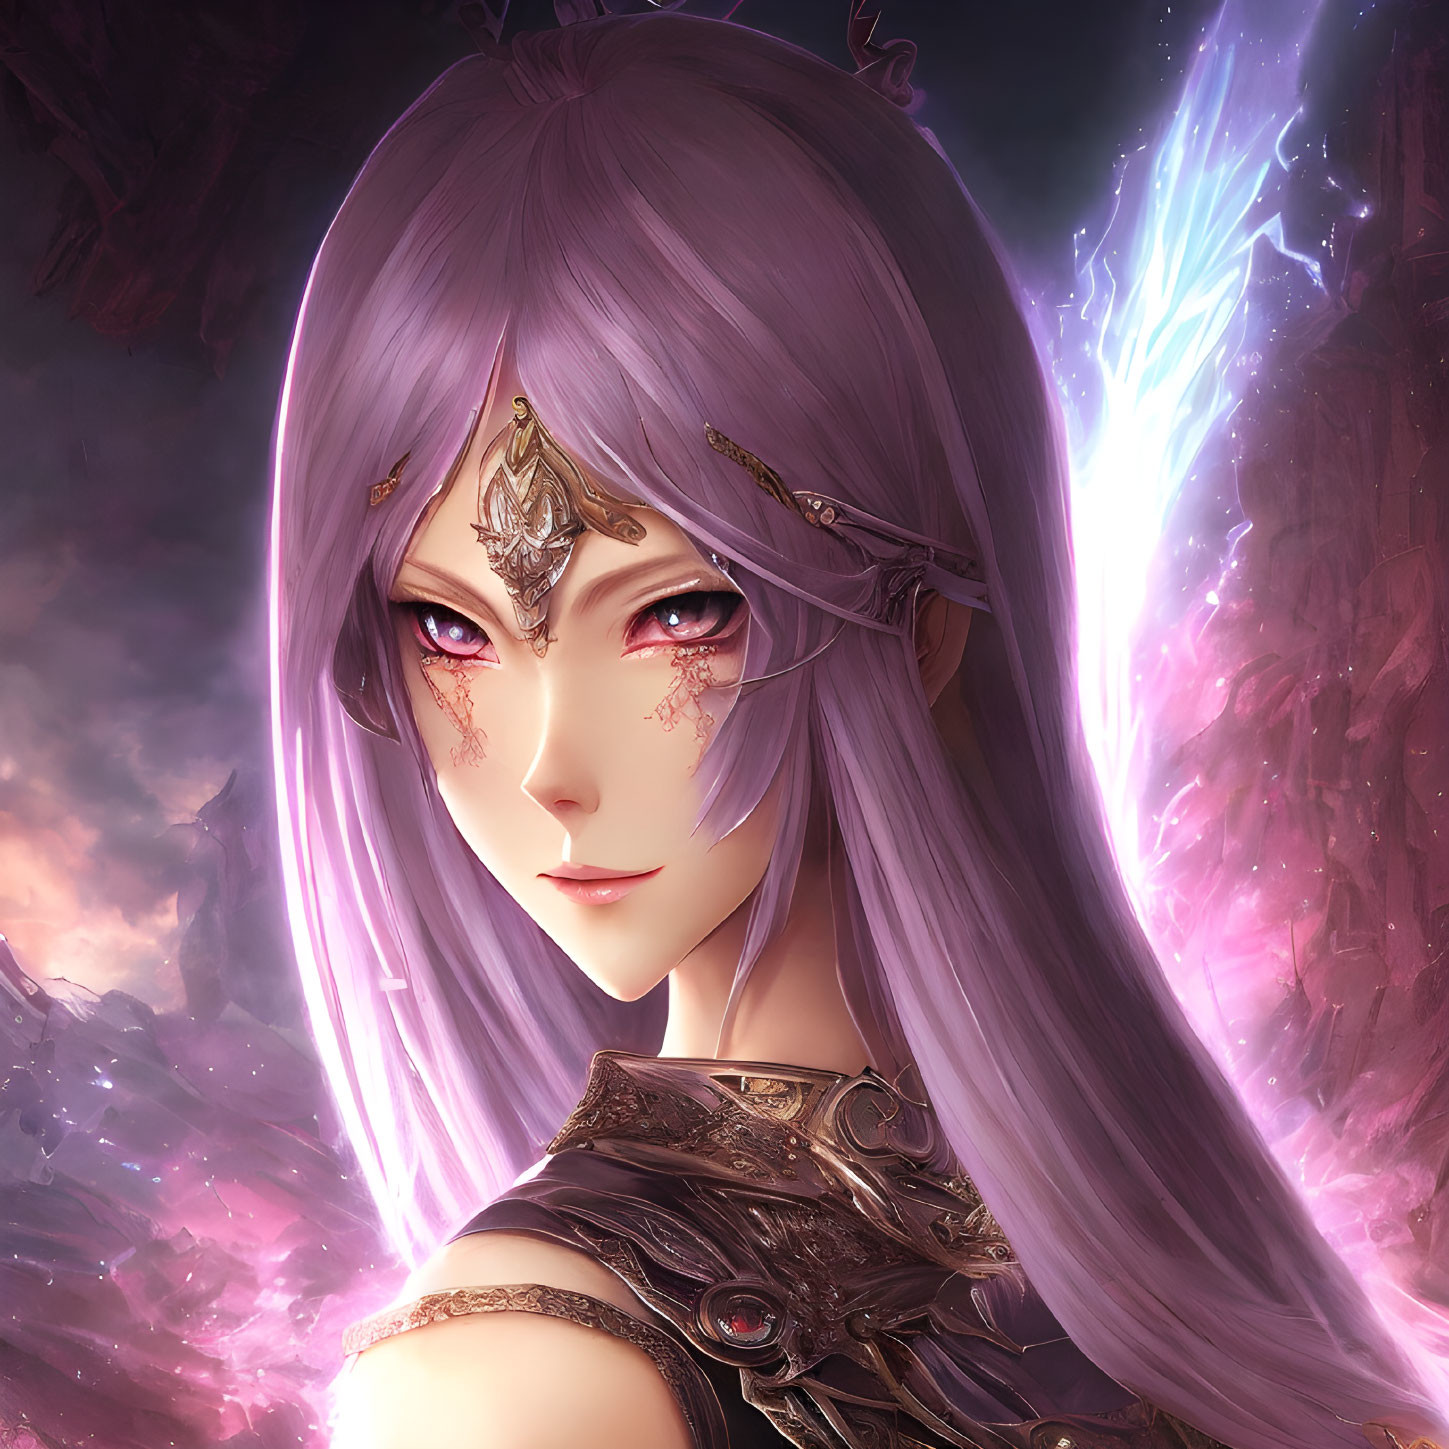 Fantasy female character with purple hair, ornate crown, and mystical energy.